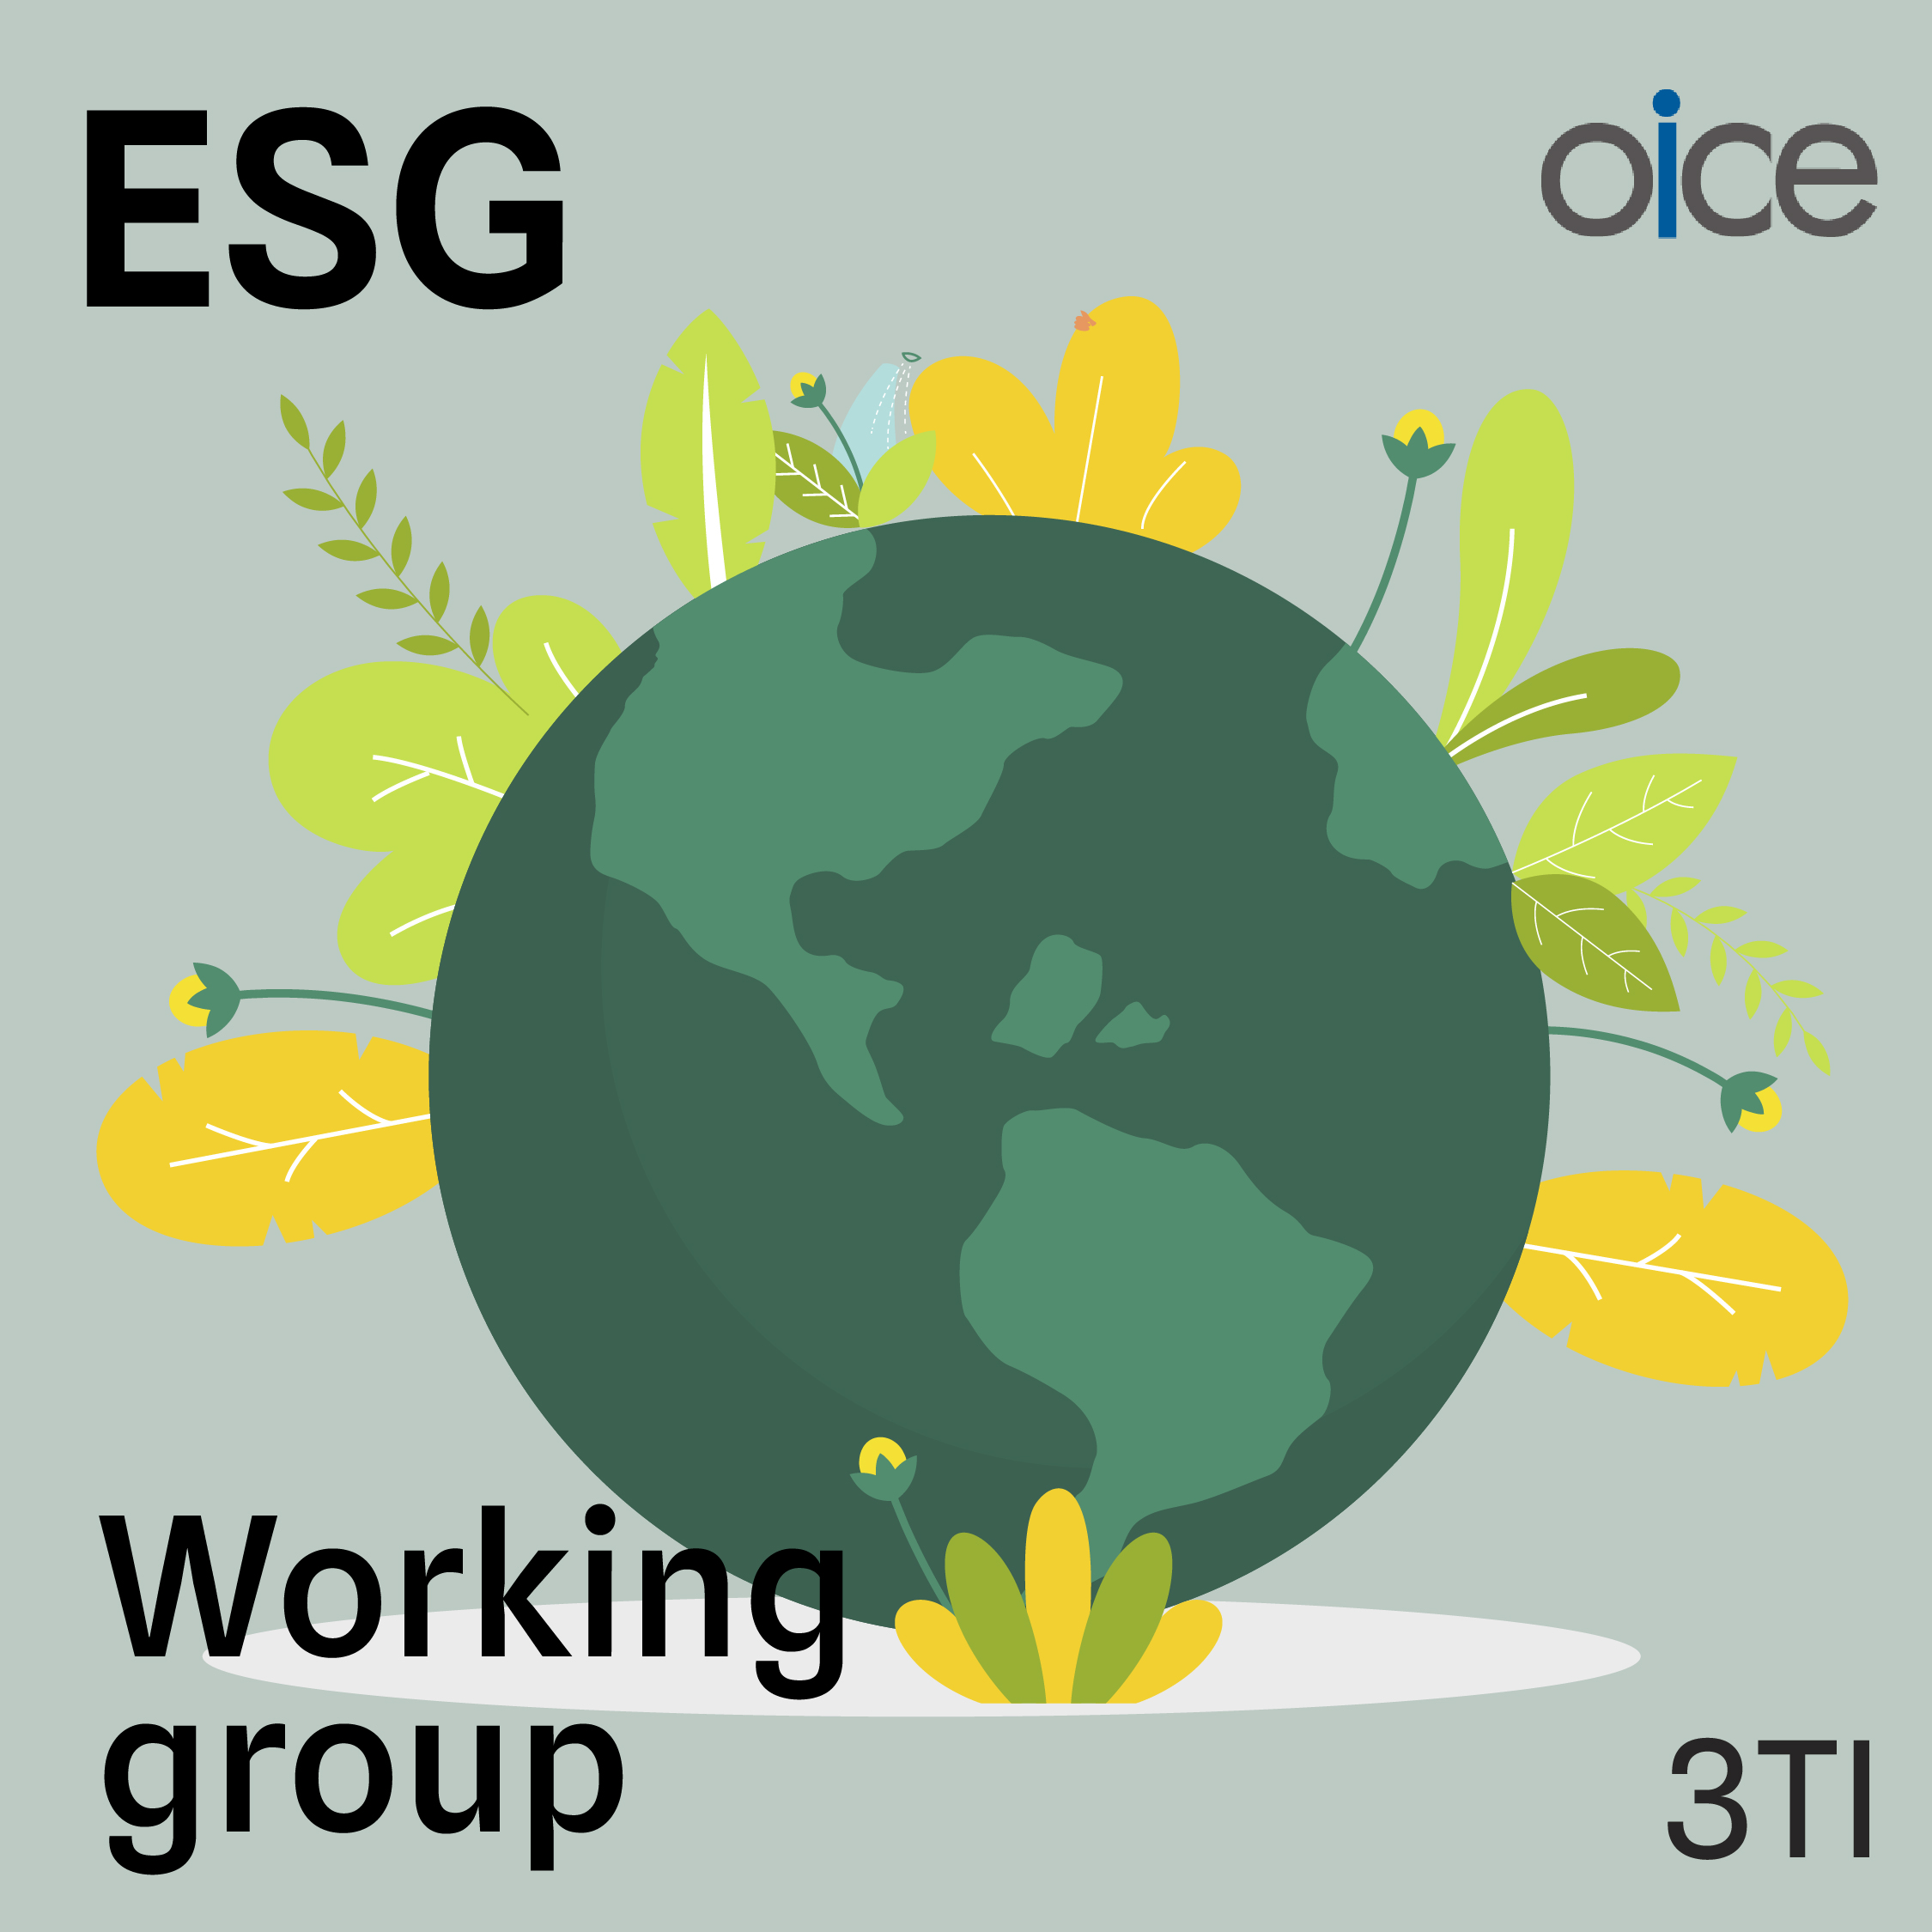 3TI participated in ESG-themed working group